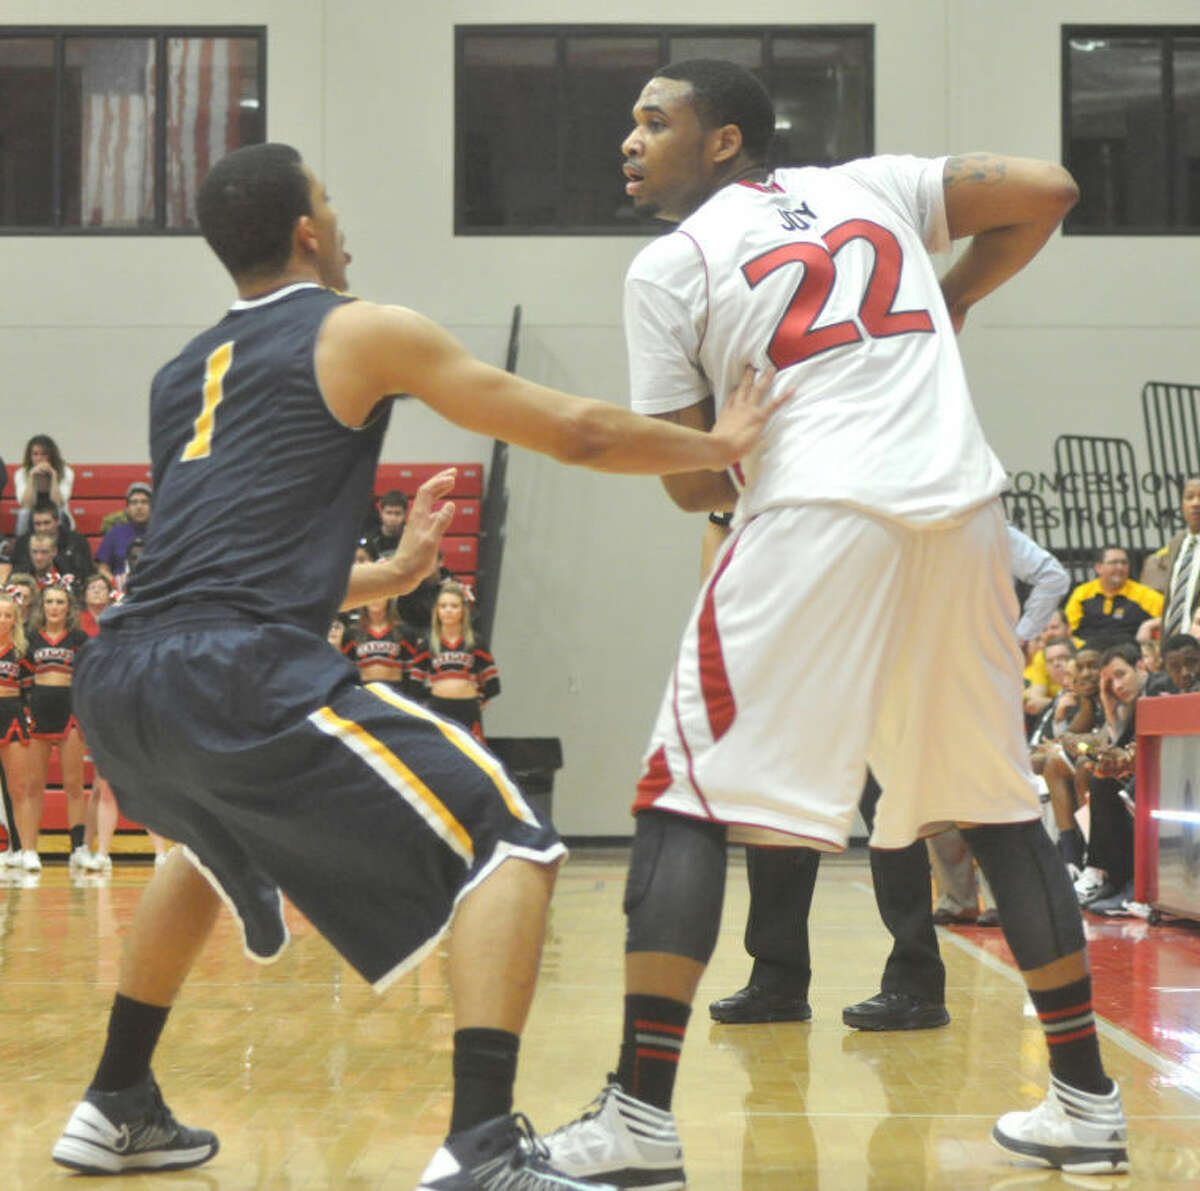 SIUE’s Charles Joy looks for an open teammate Thursday at the Vadalabene Center against Murray State during the second half.